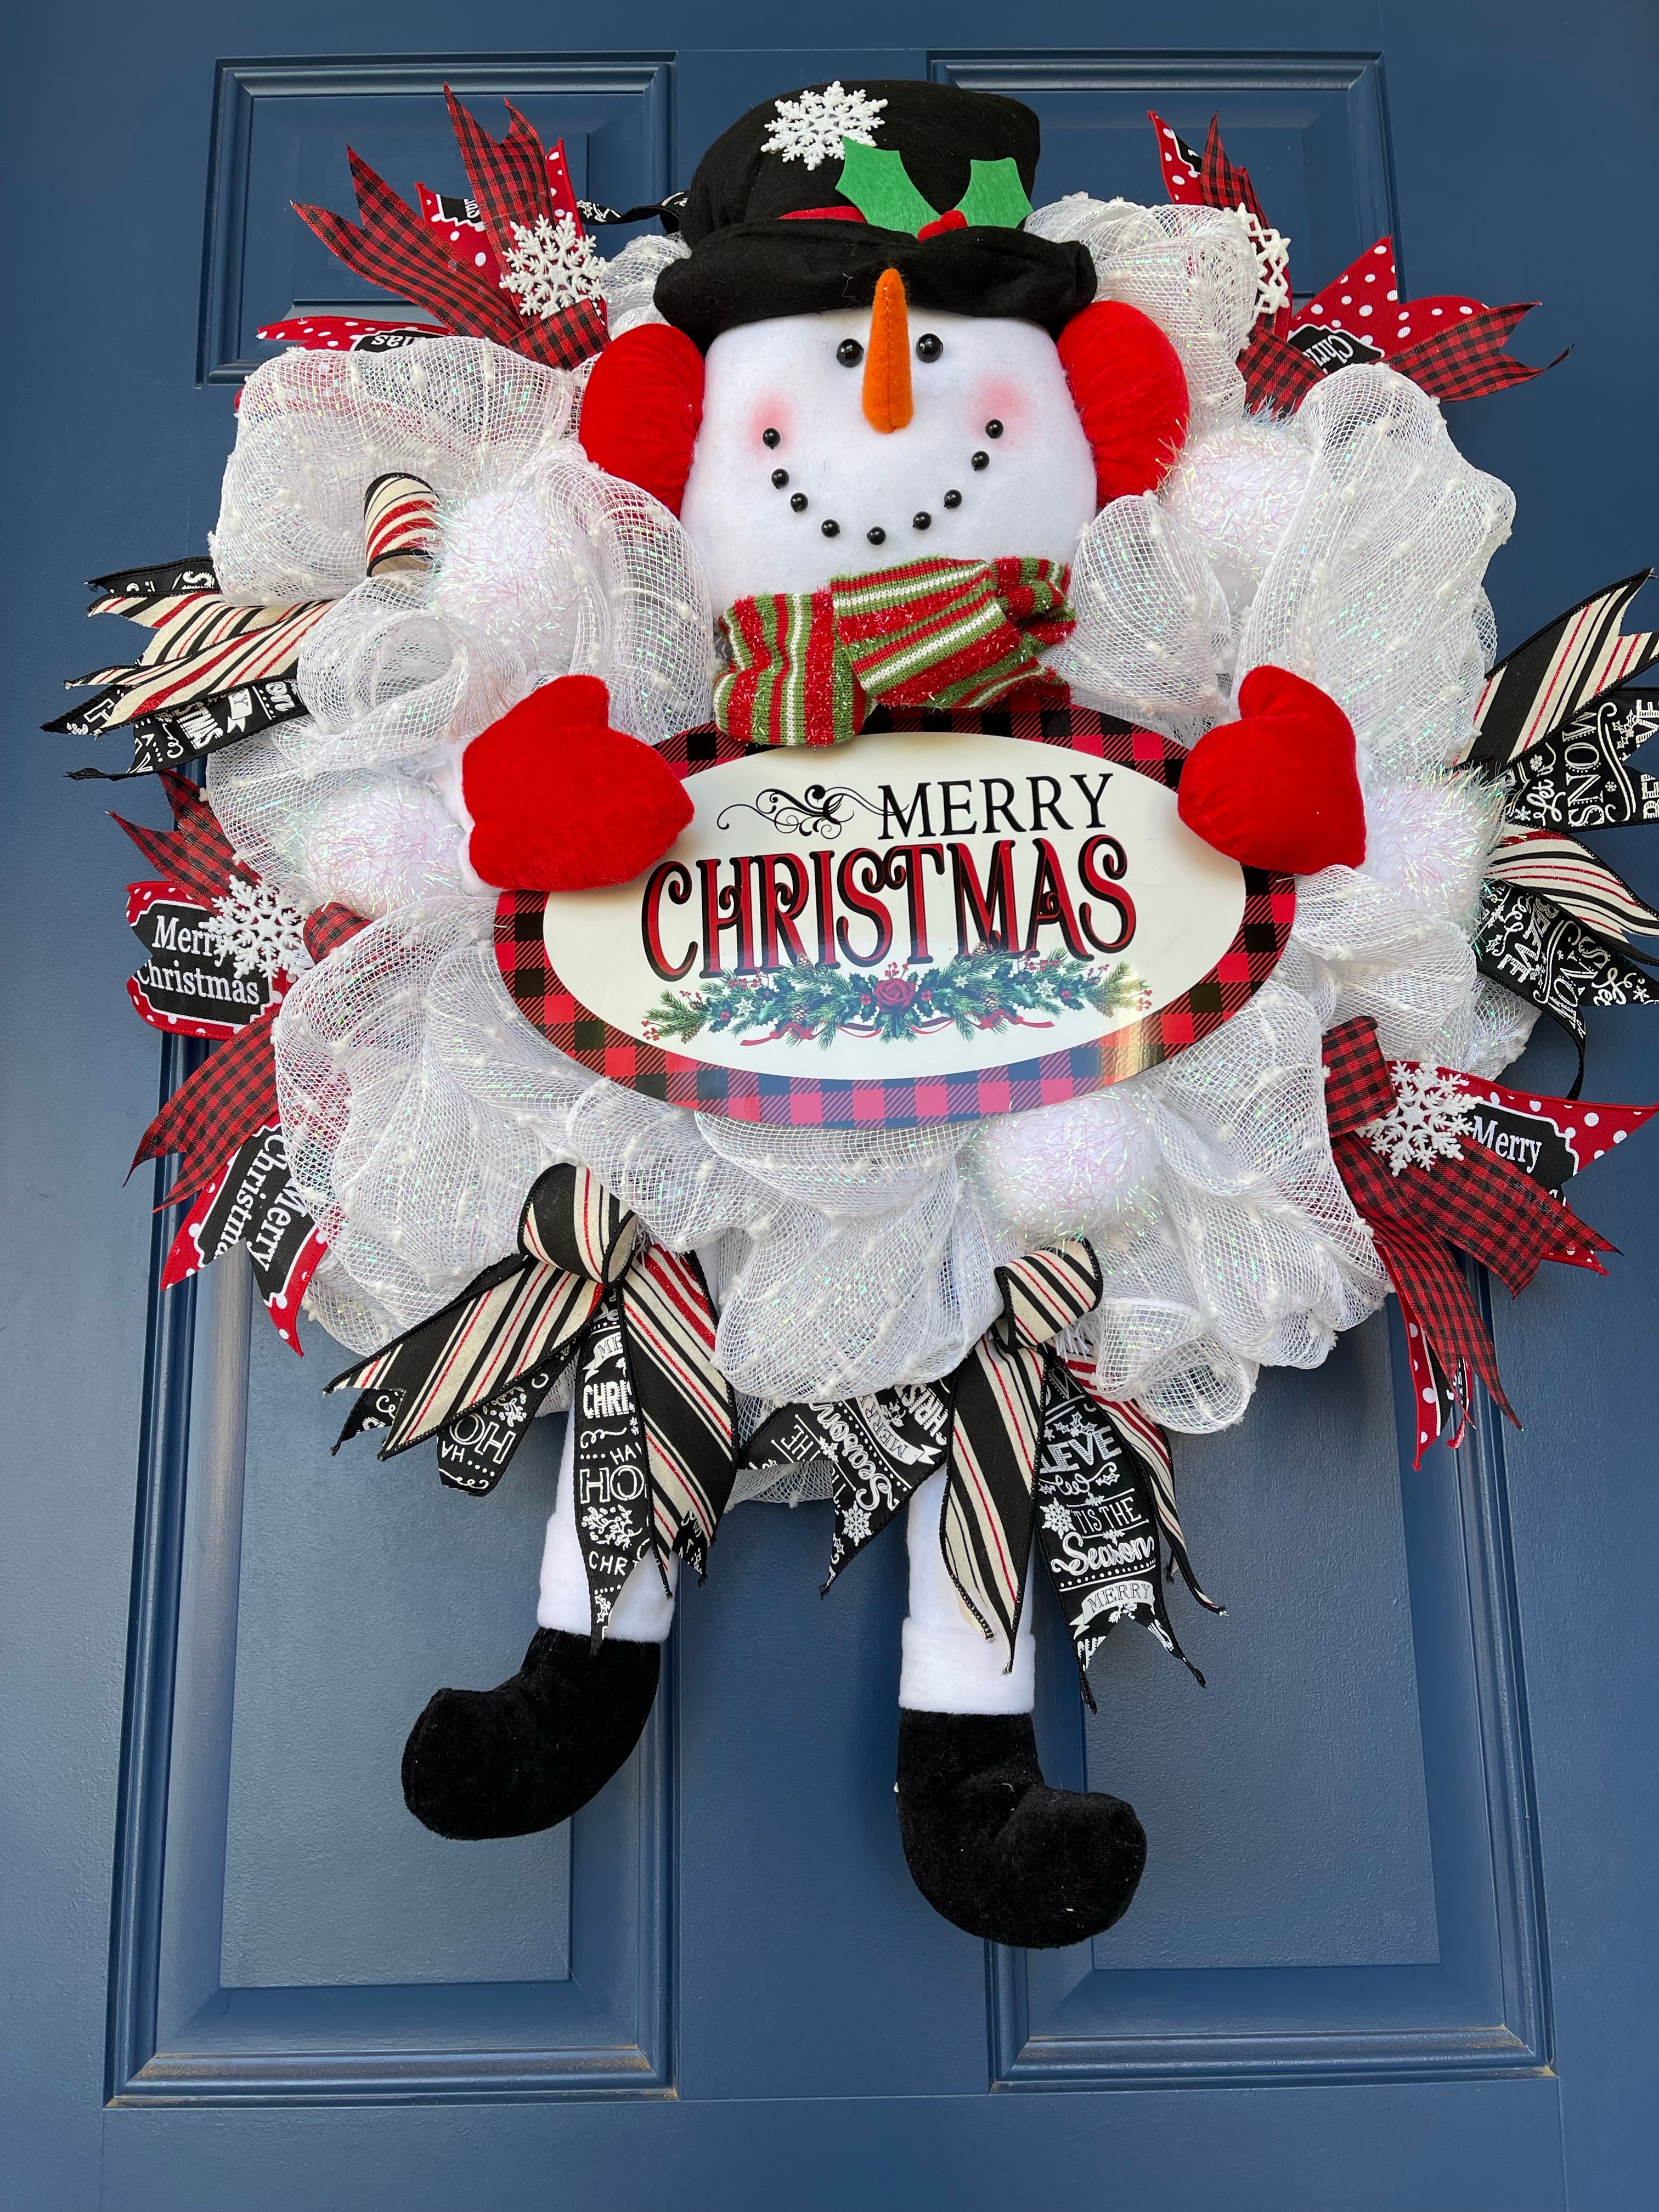 Bottom View of Red, White and Black Snowman Plush Deco Mesh Wreath holding a Merry Christmas Sign on a blue door